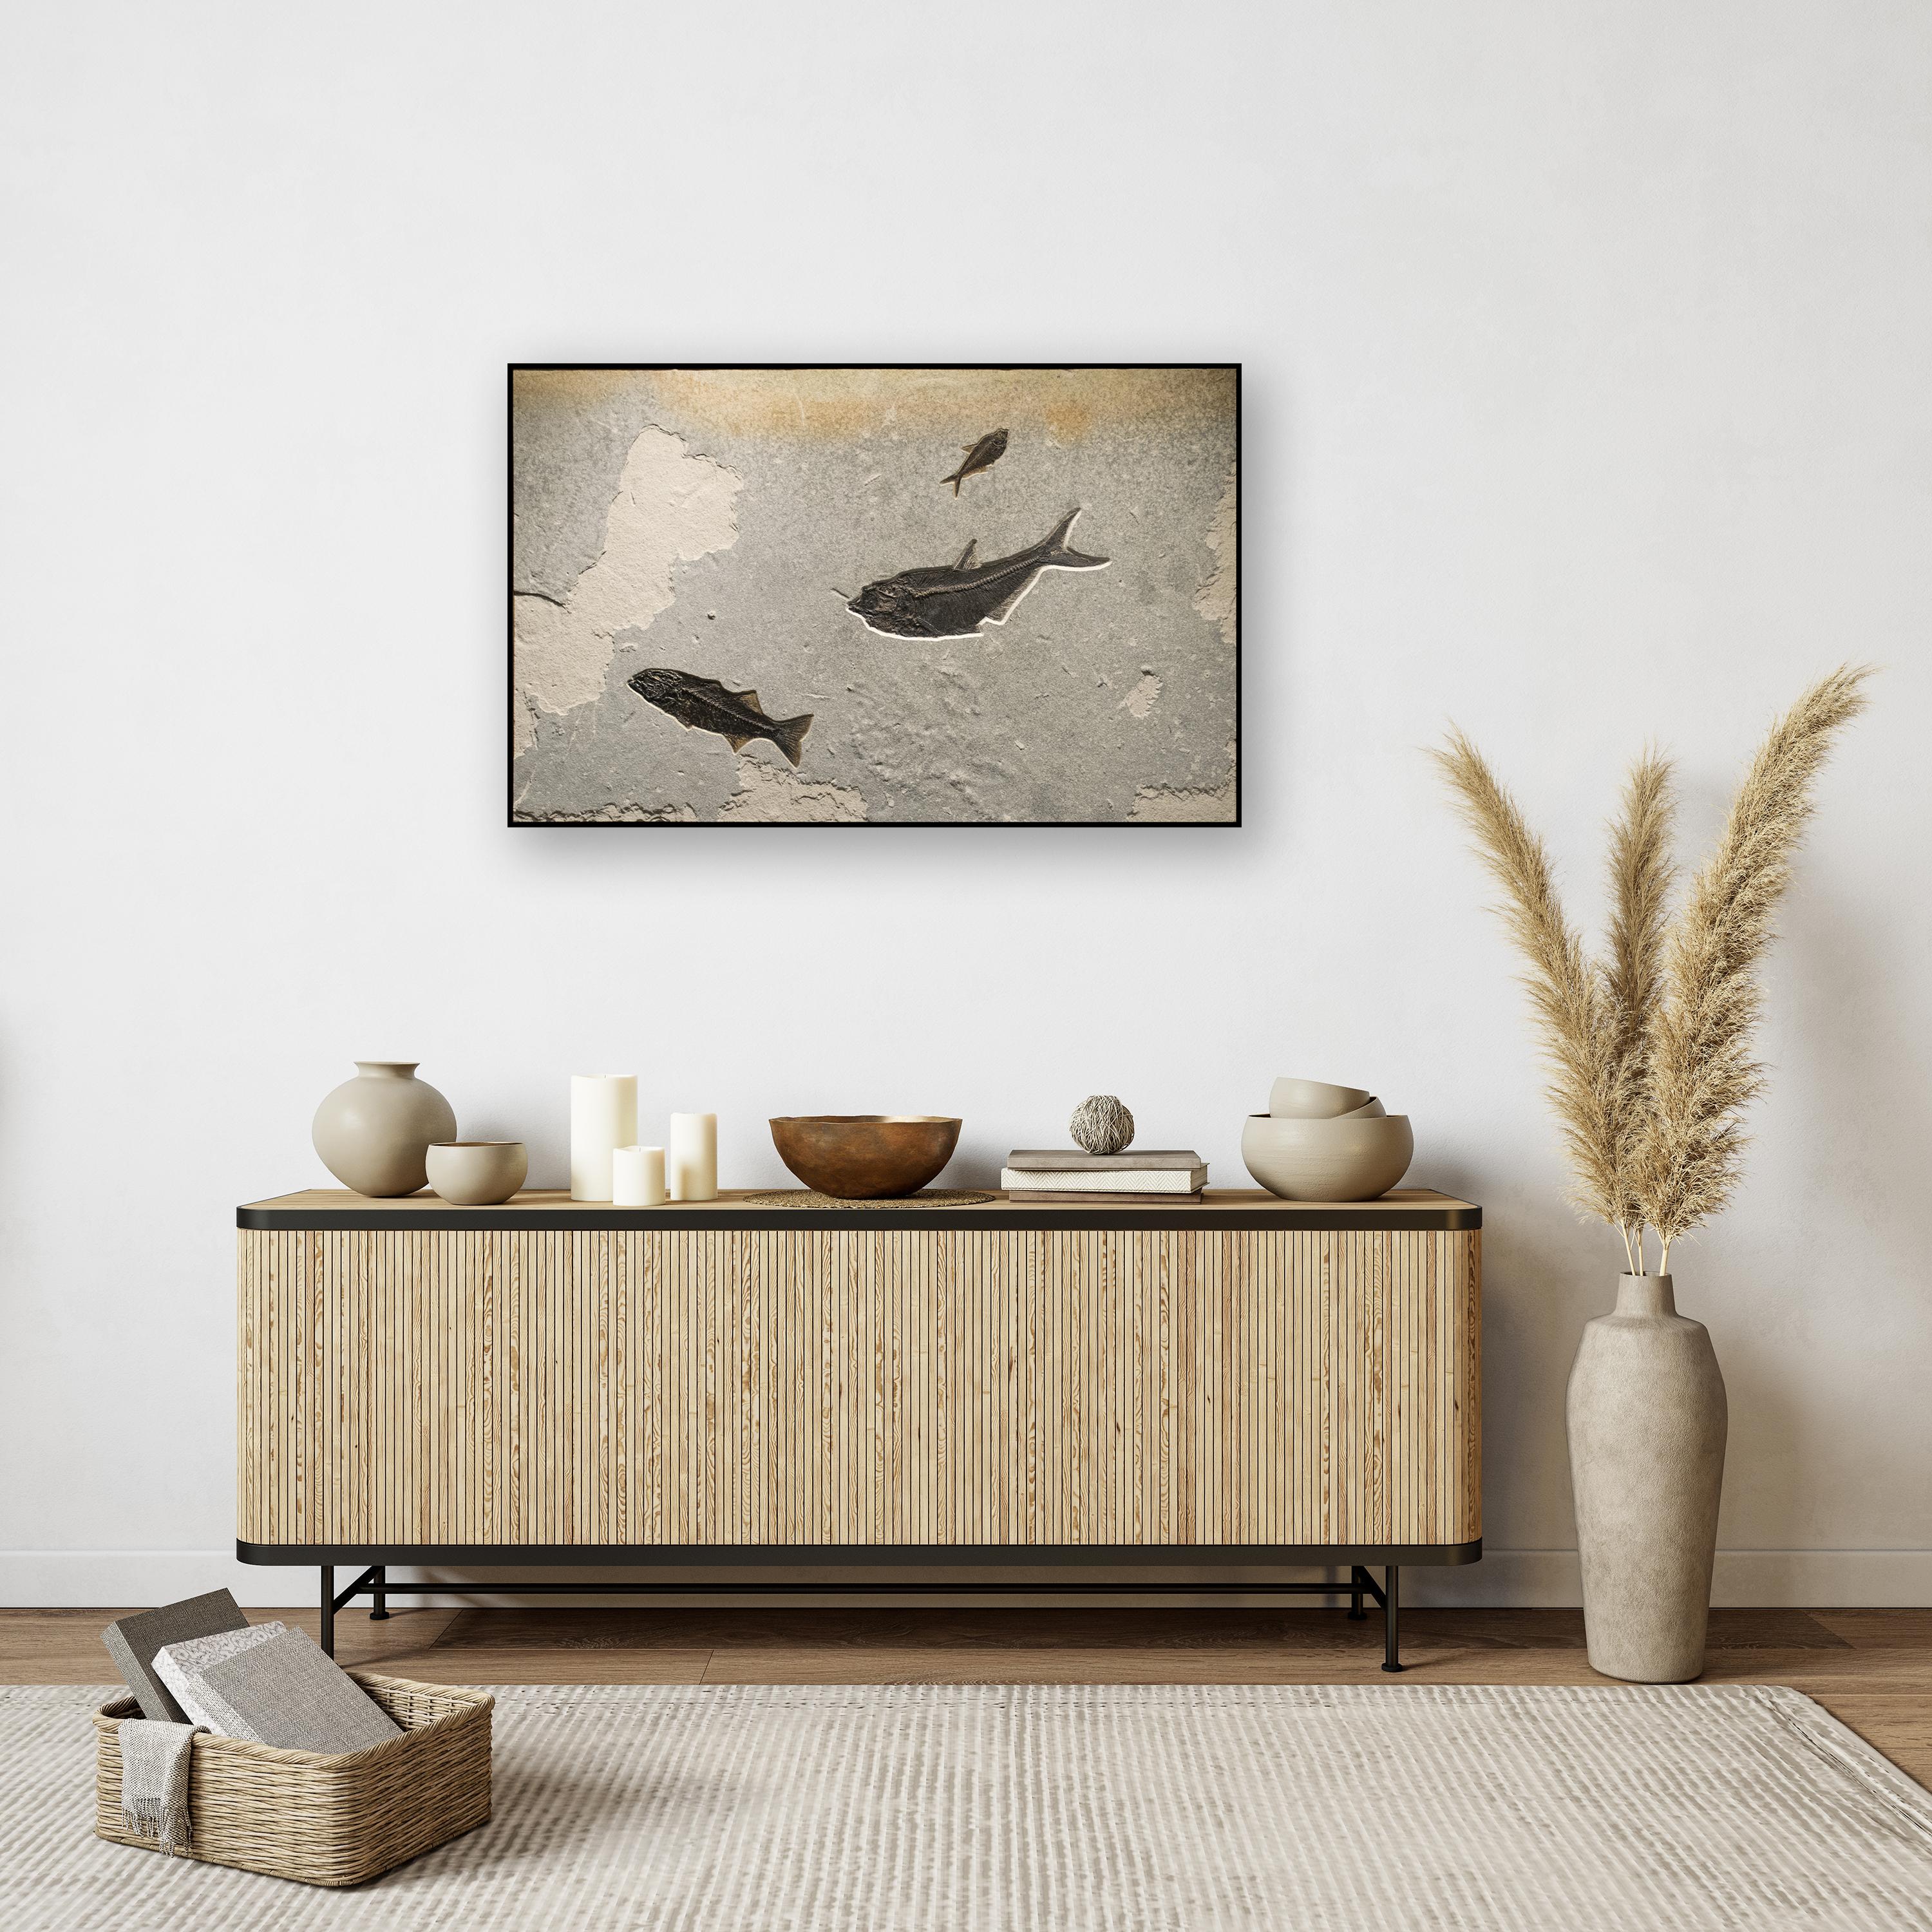 This fossil mural features two Diplomystus dentatus and one Mioplosus labracoides, all of which are Eocene era fossils dating back about 50 million years. These ancient fish are forever preserved in a beautifully textured matrix of natural,